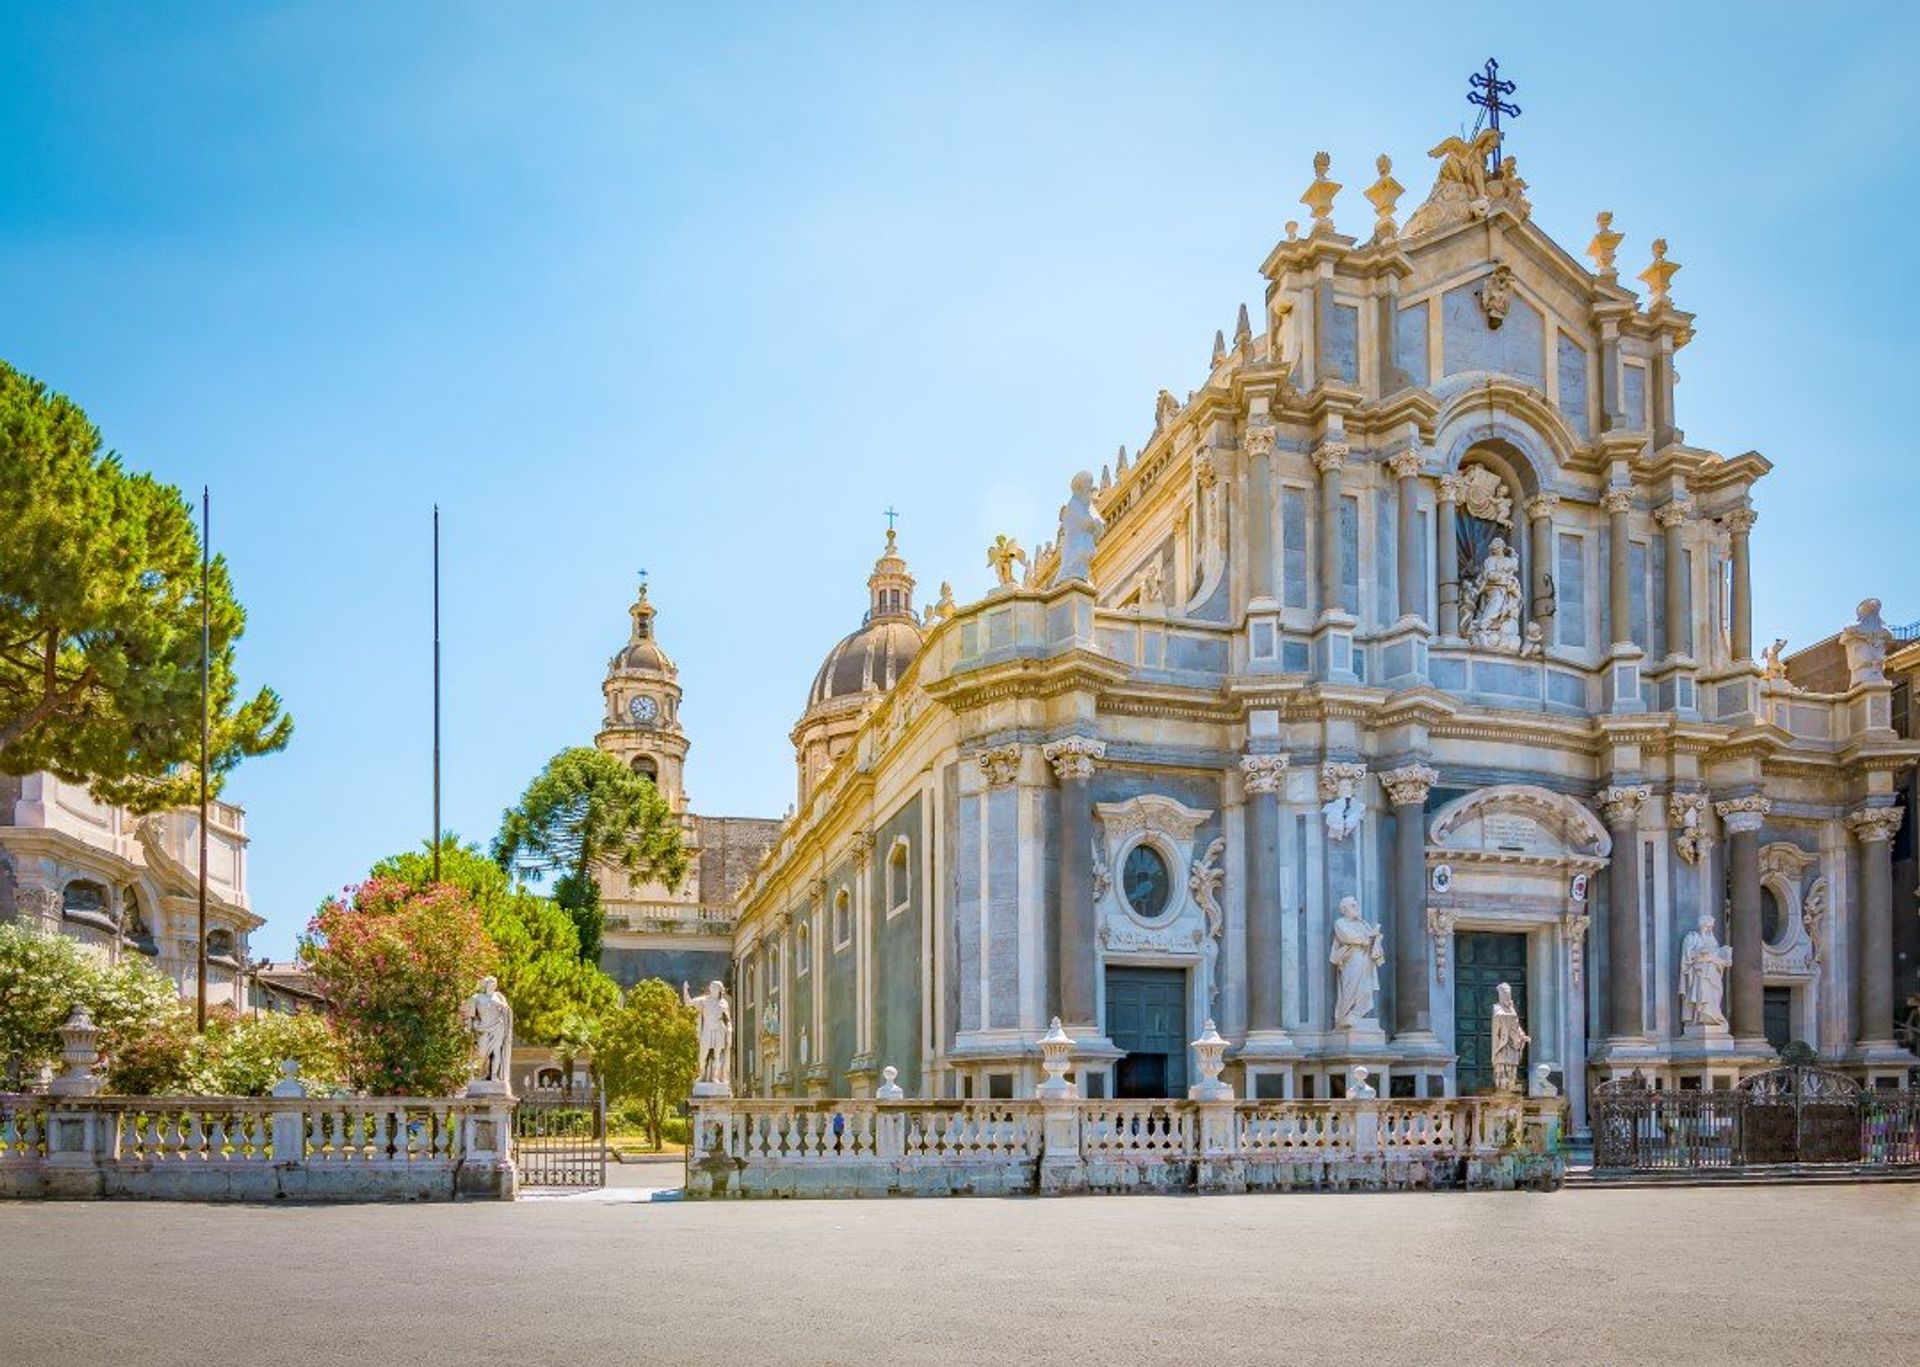 A UNESCO World Heritage Site, Piazza del Duomo in Sicily is a stunning piece of baroque architecture